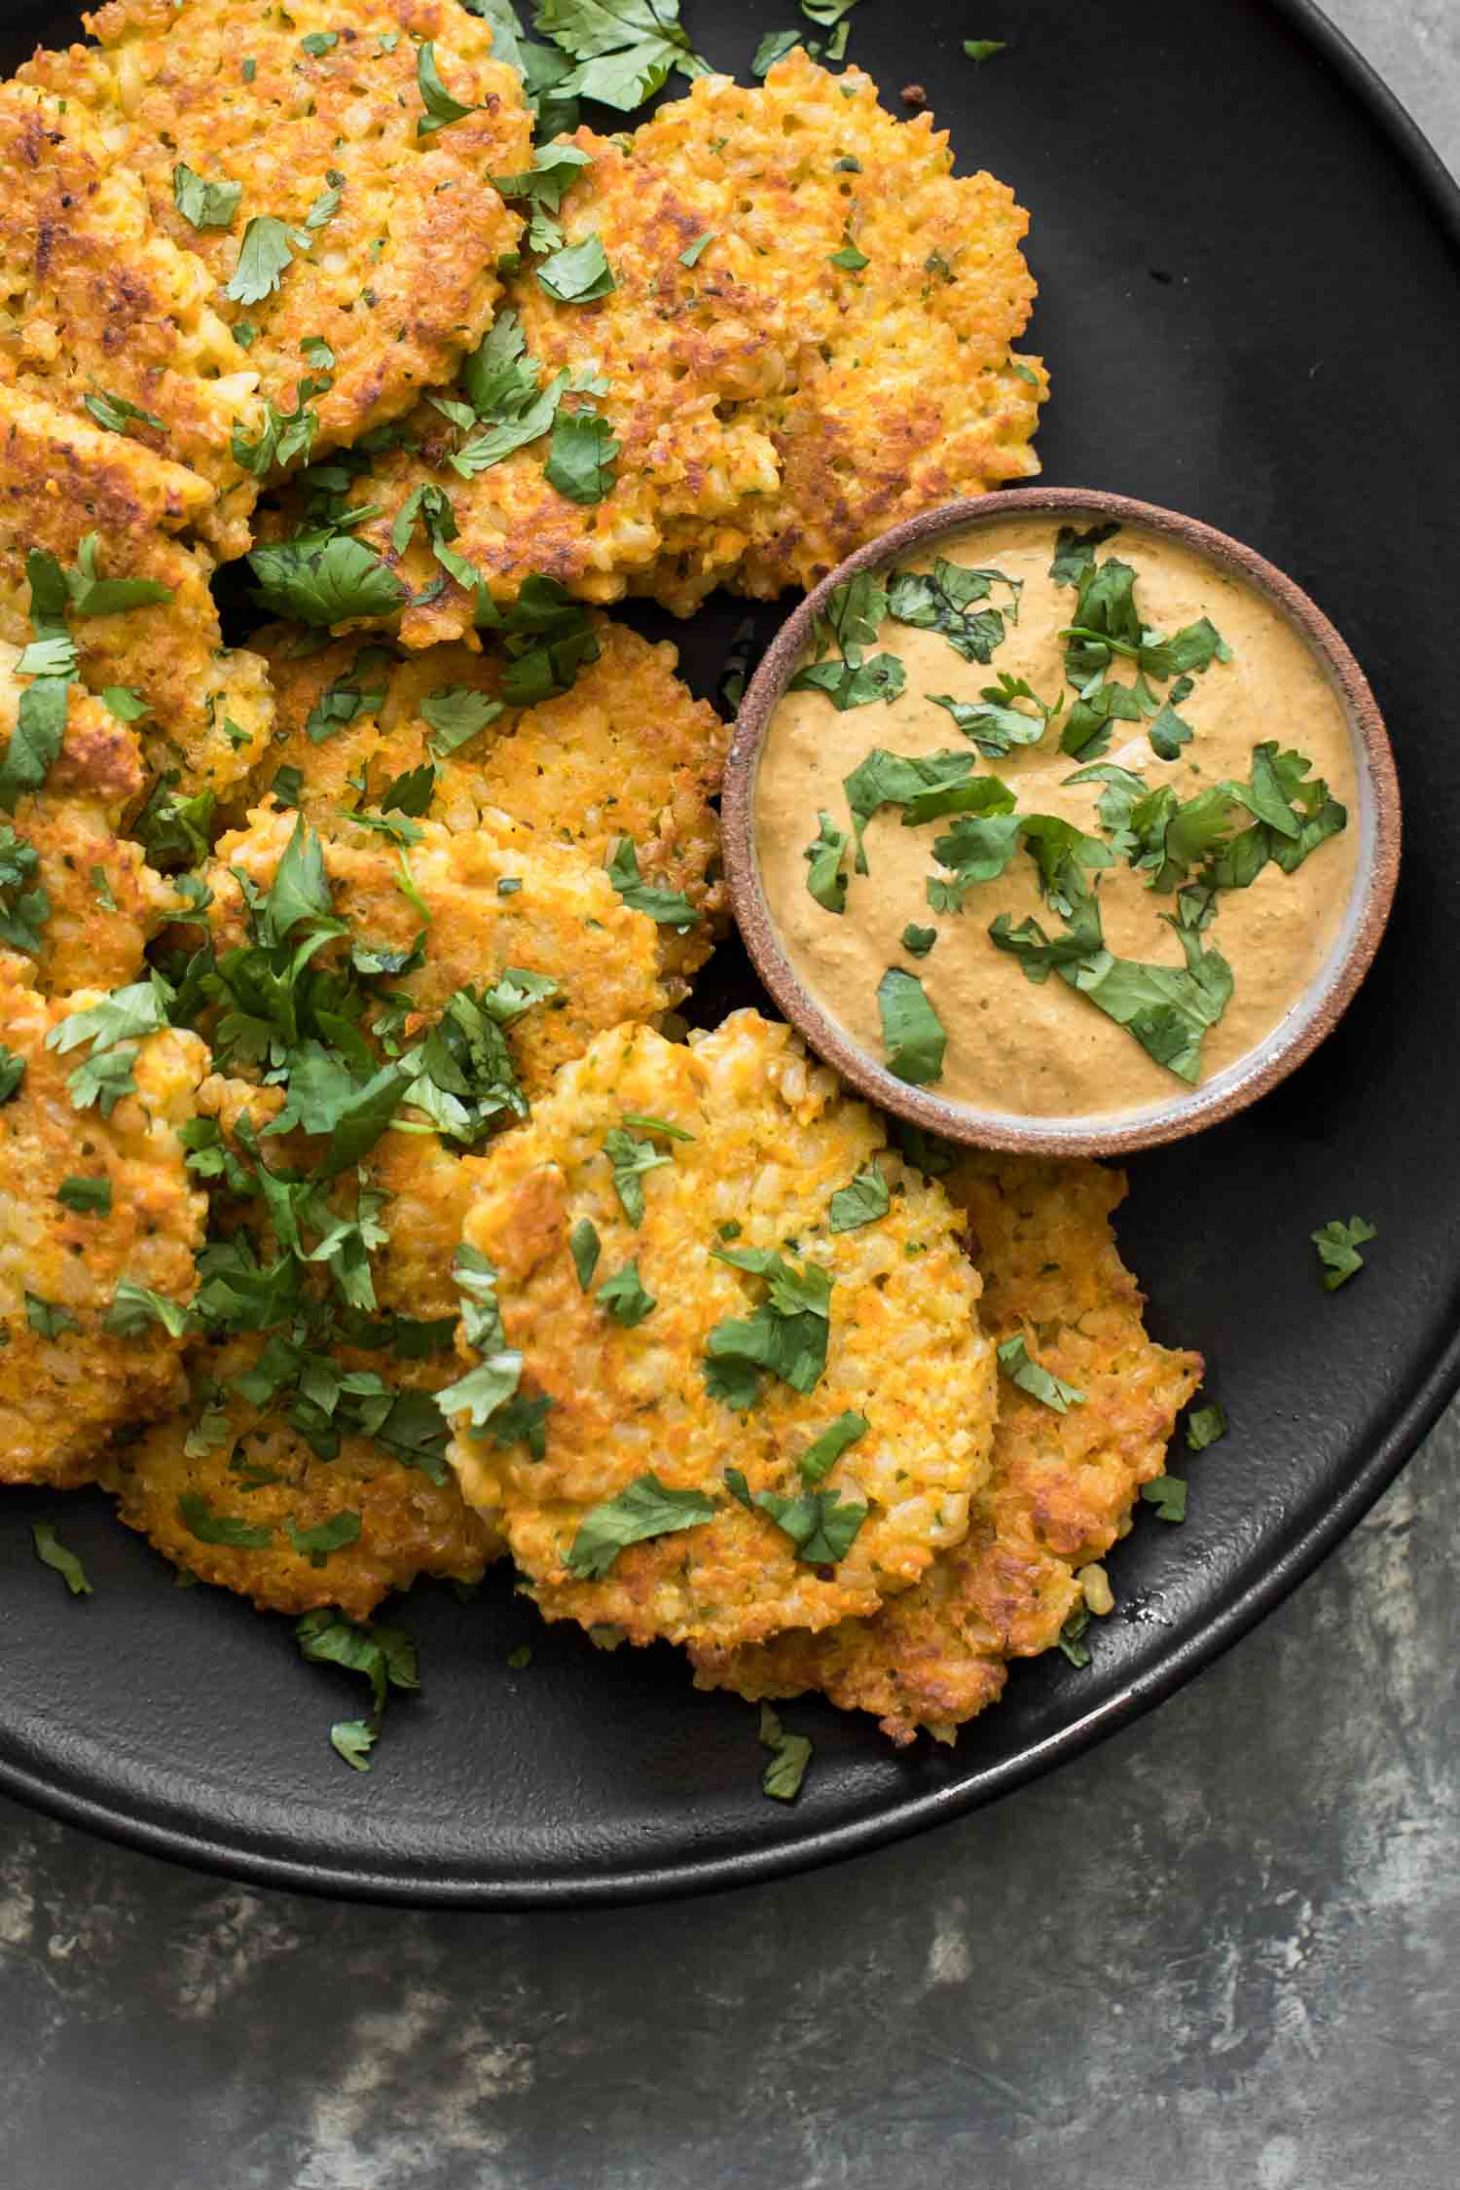 Brown Rice Carrot Fritters with Chipotle Sunflower Sauce